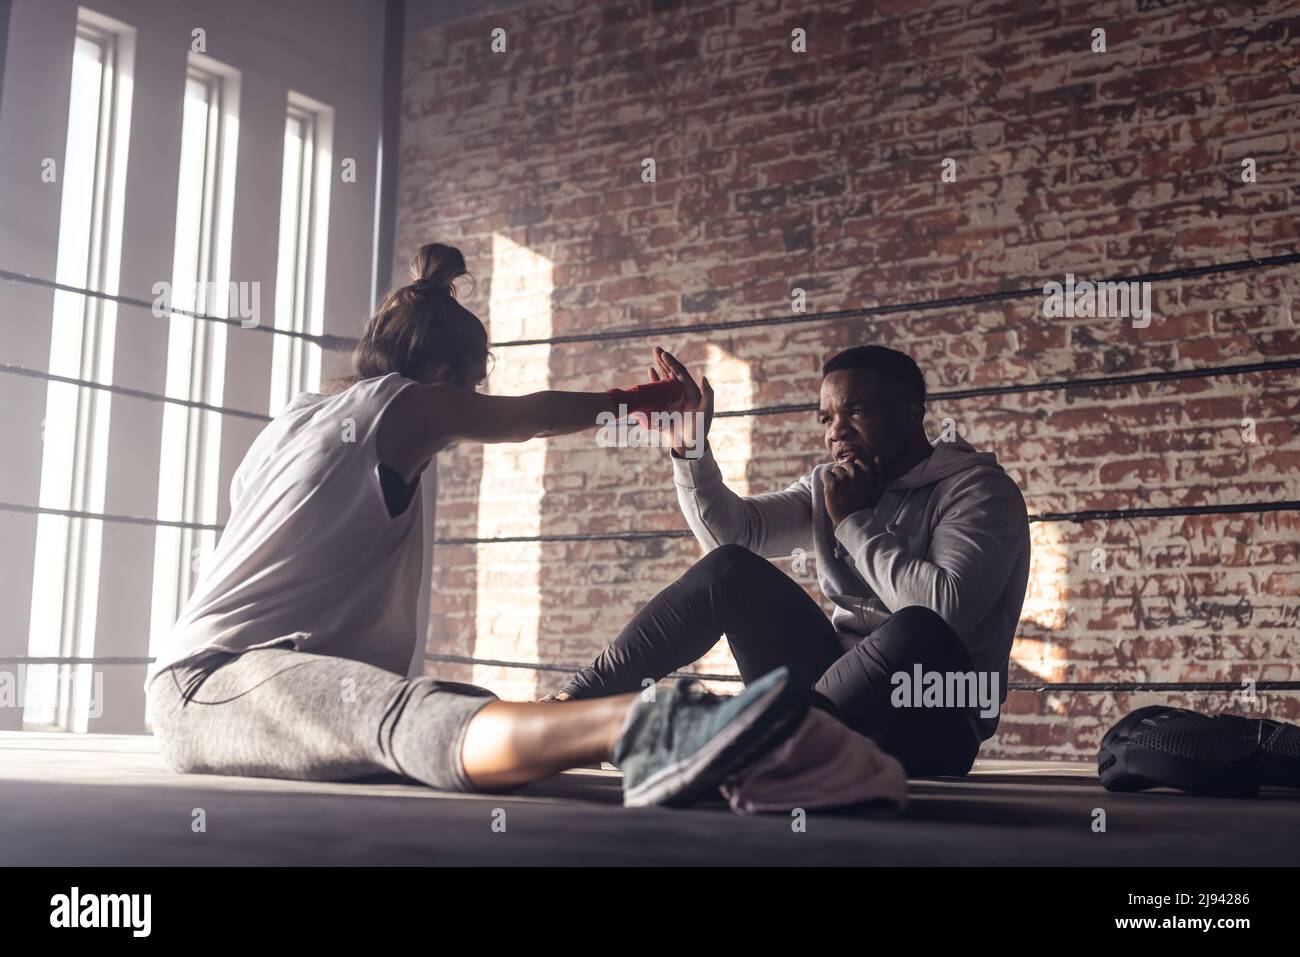 Caucasian female boxer punching african american male coach's hand while sitting in boxing ring Stock Photo